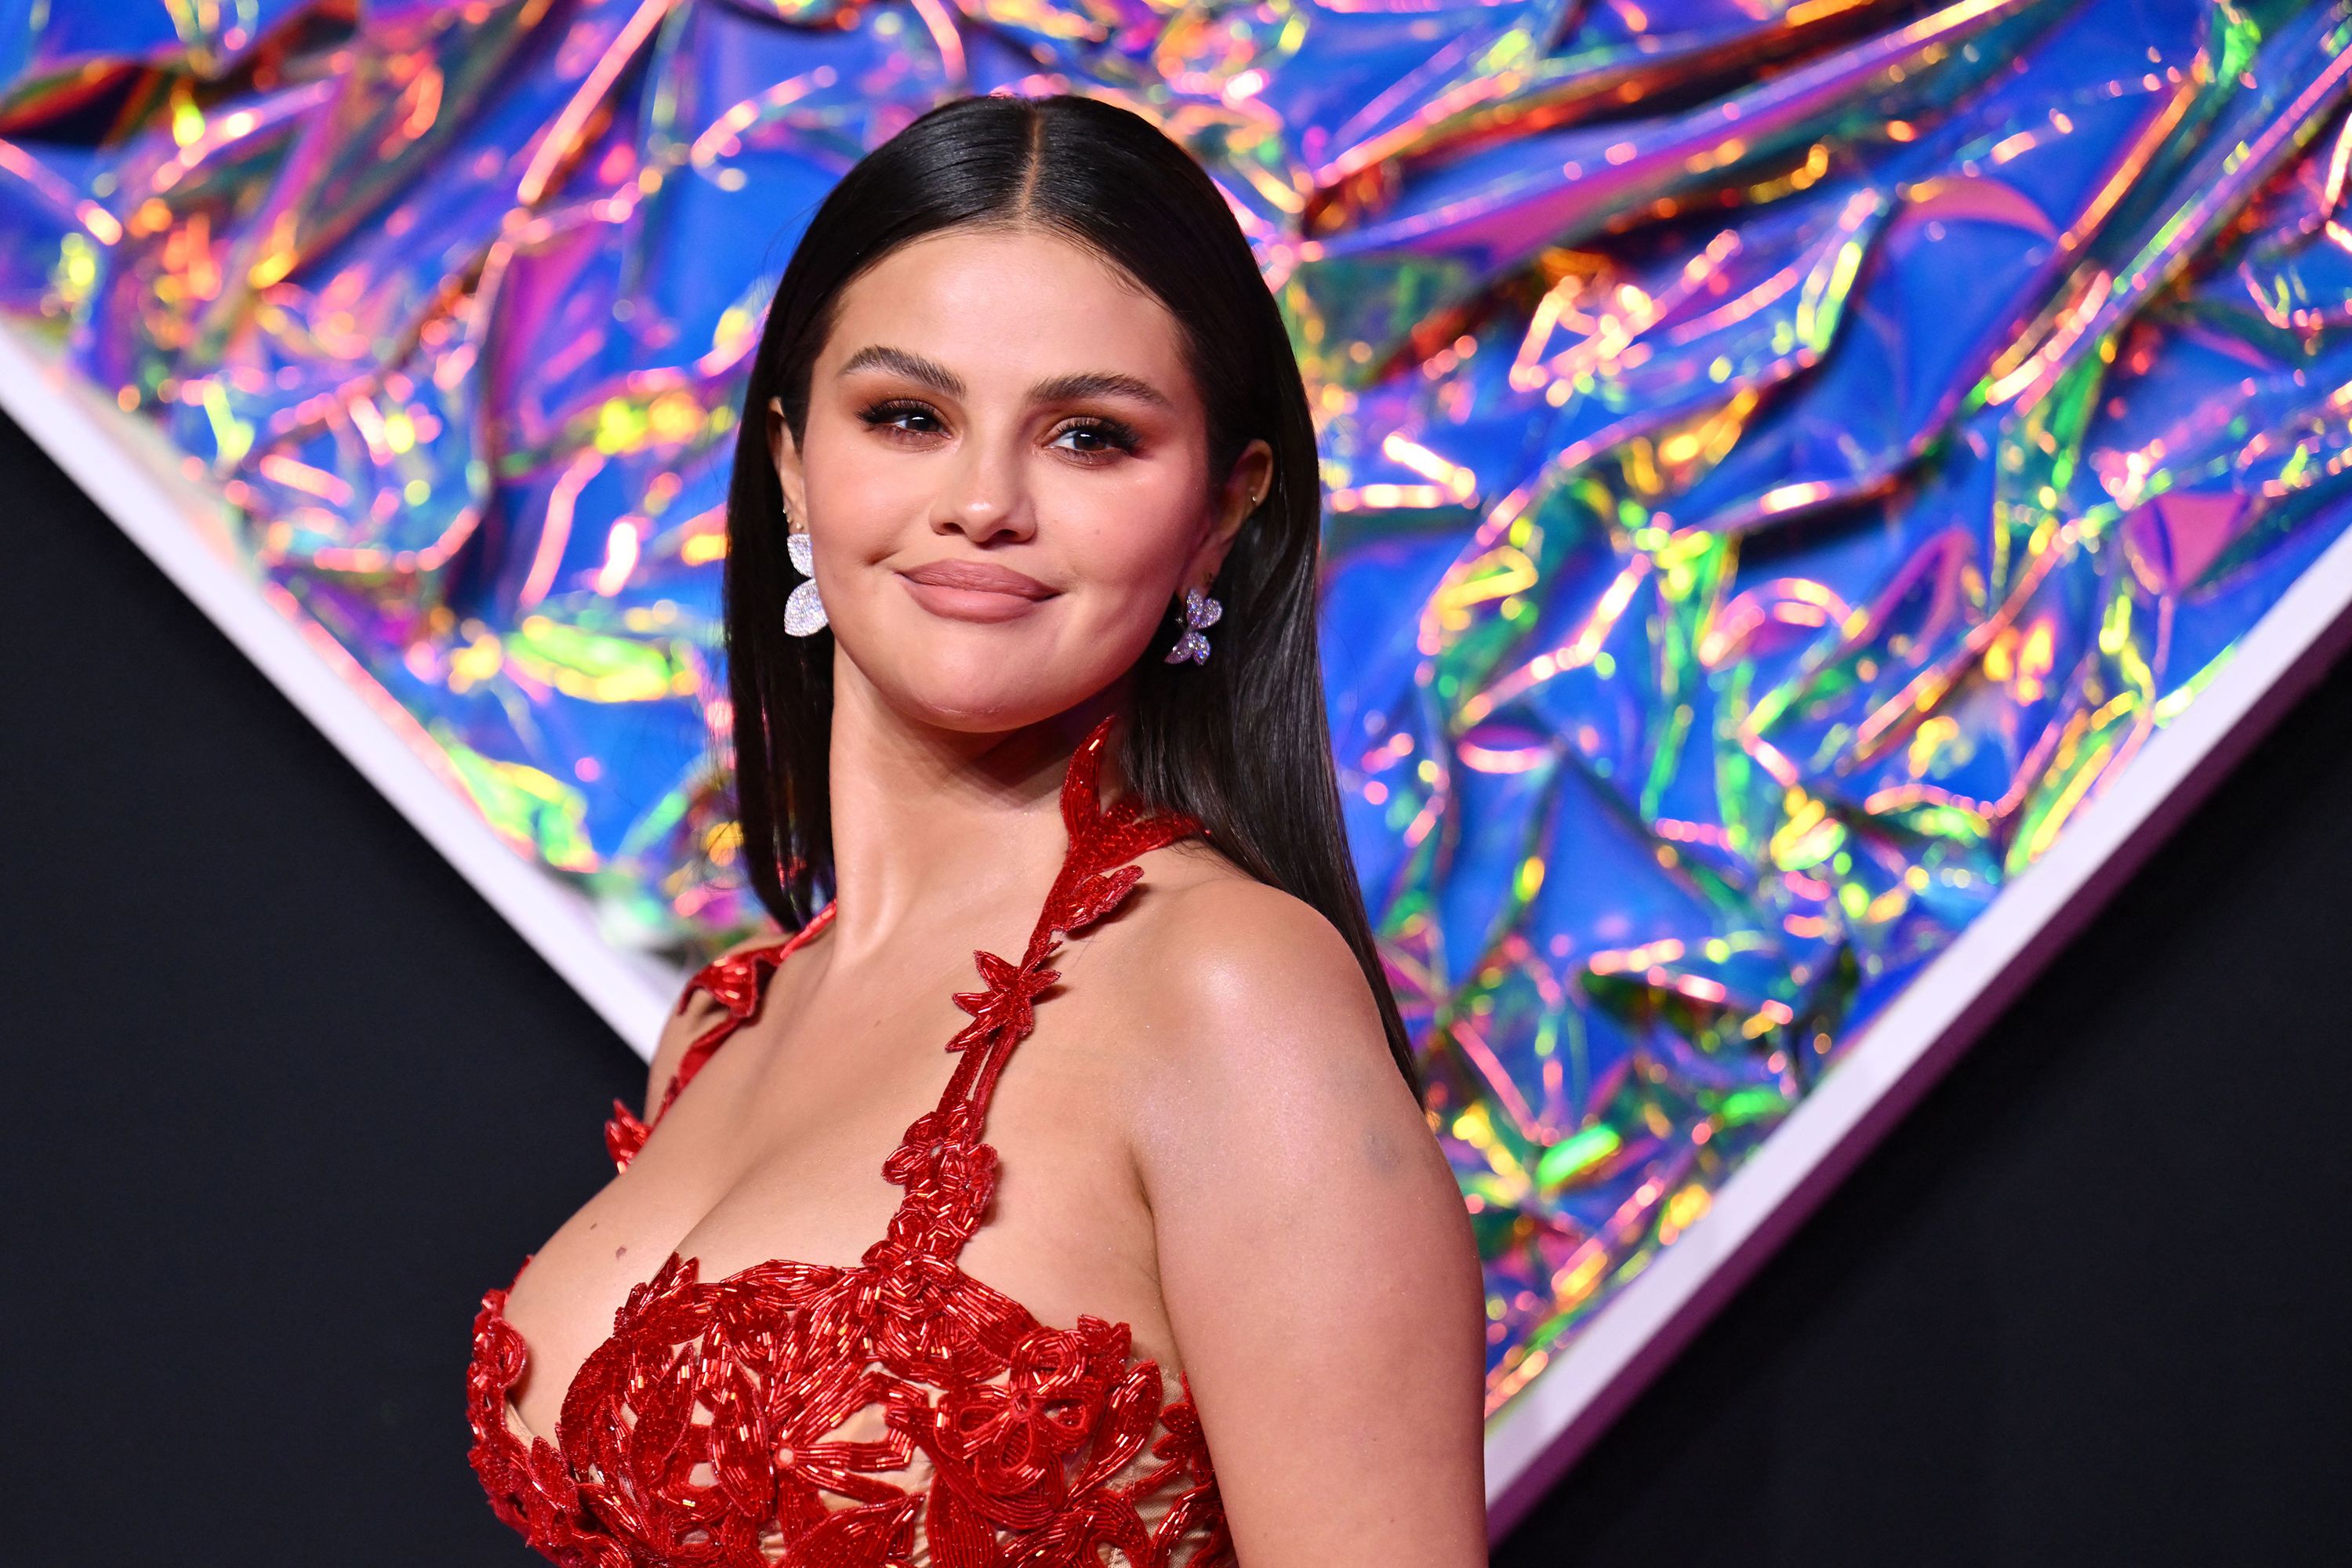 Selena Gomez pokes fun and gets serious about her MTV VMAs look